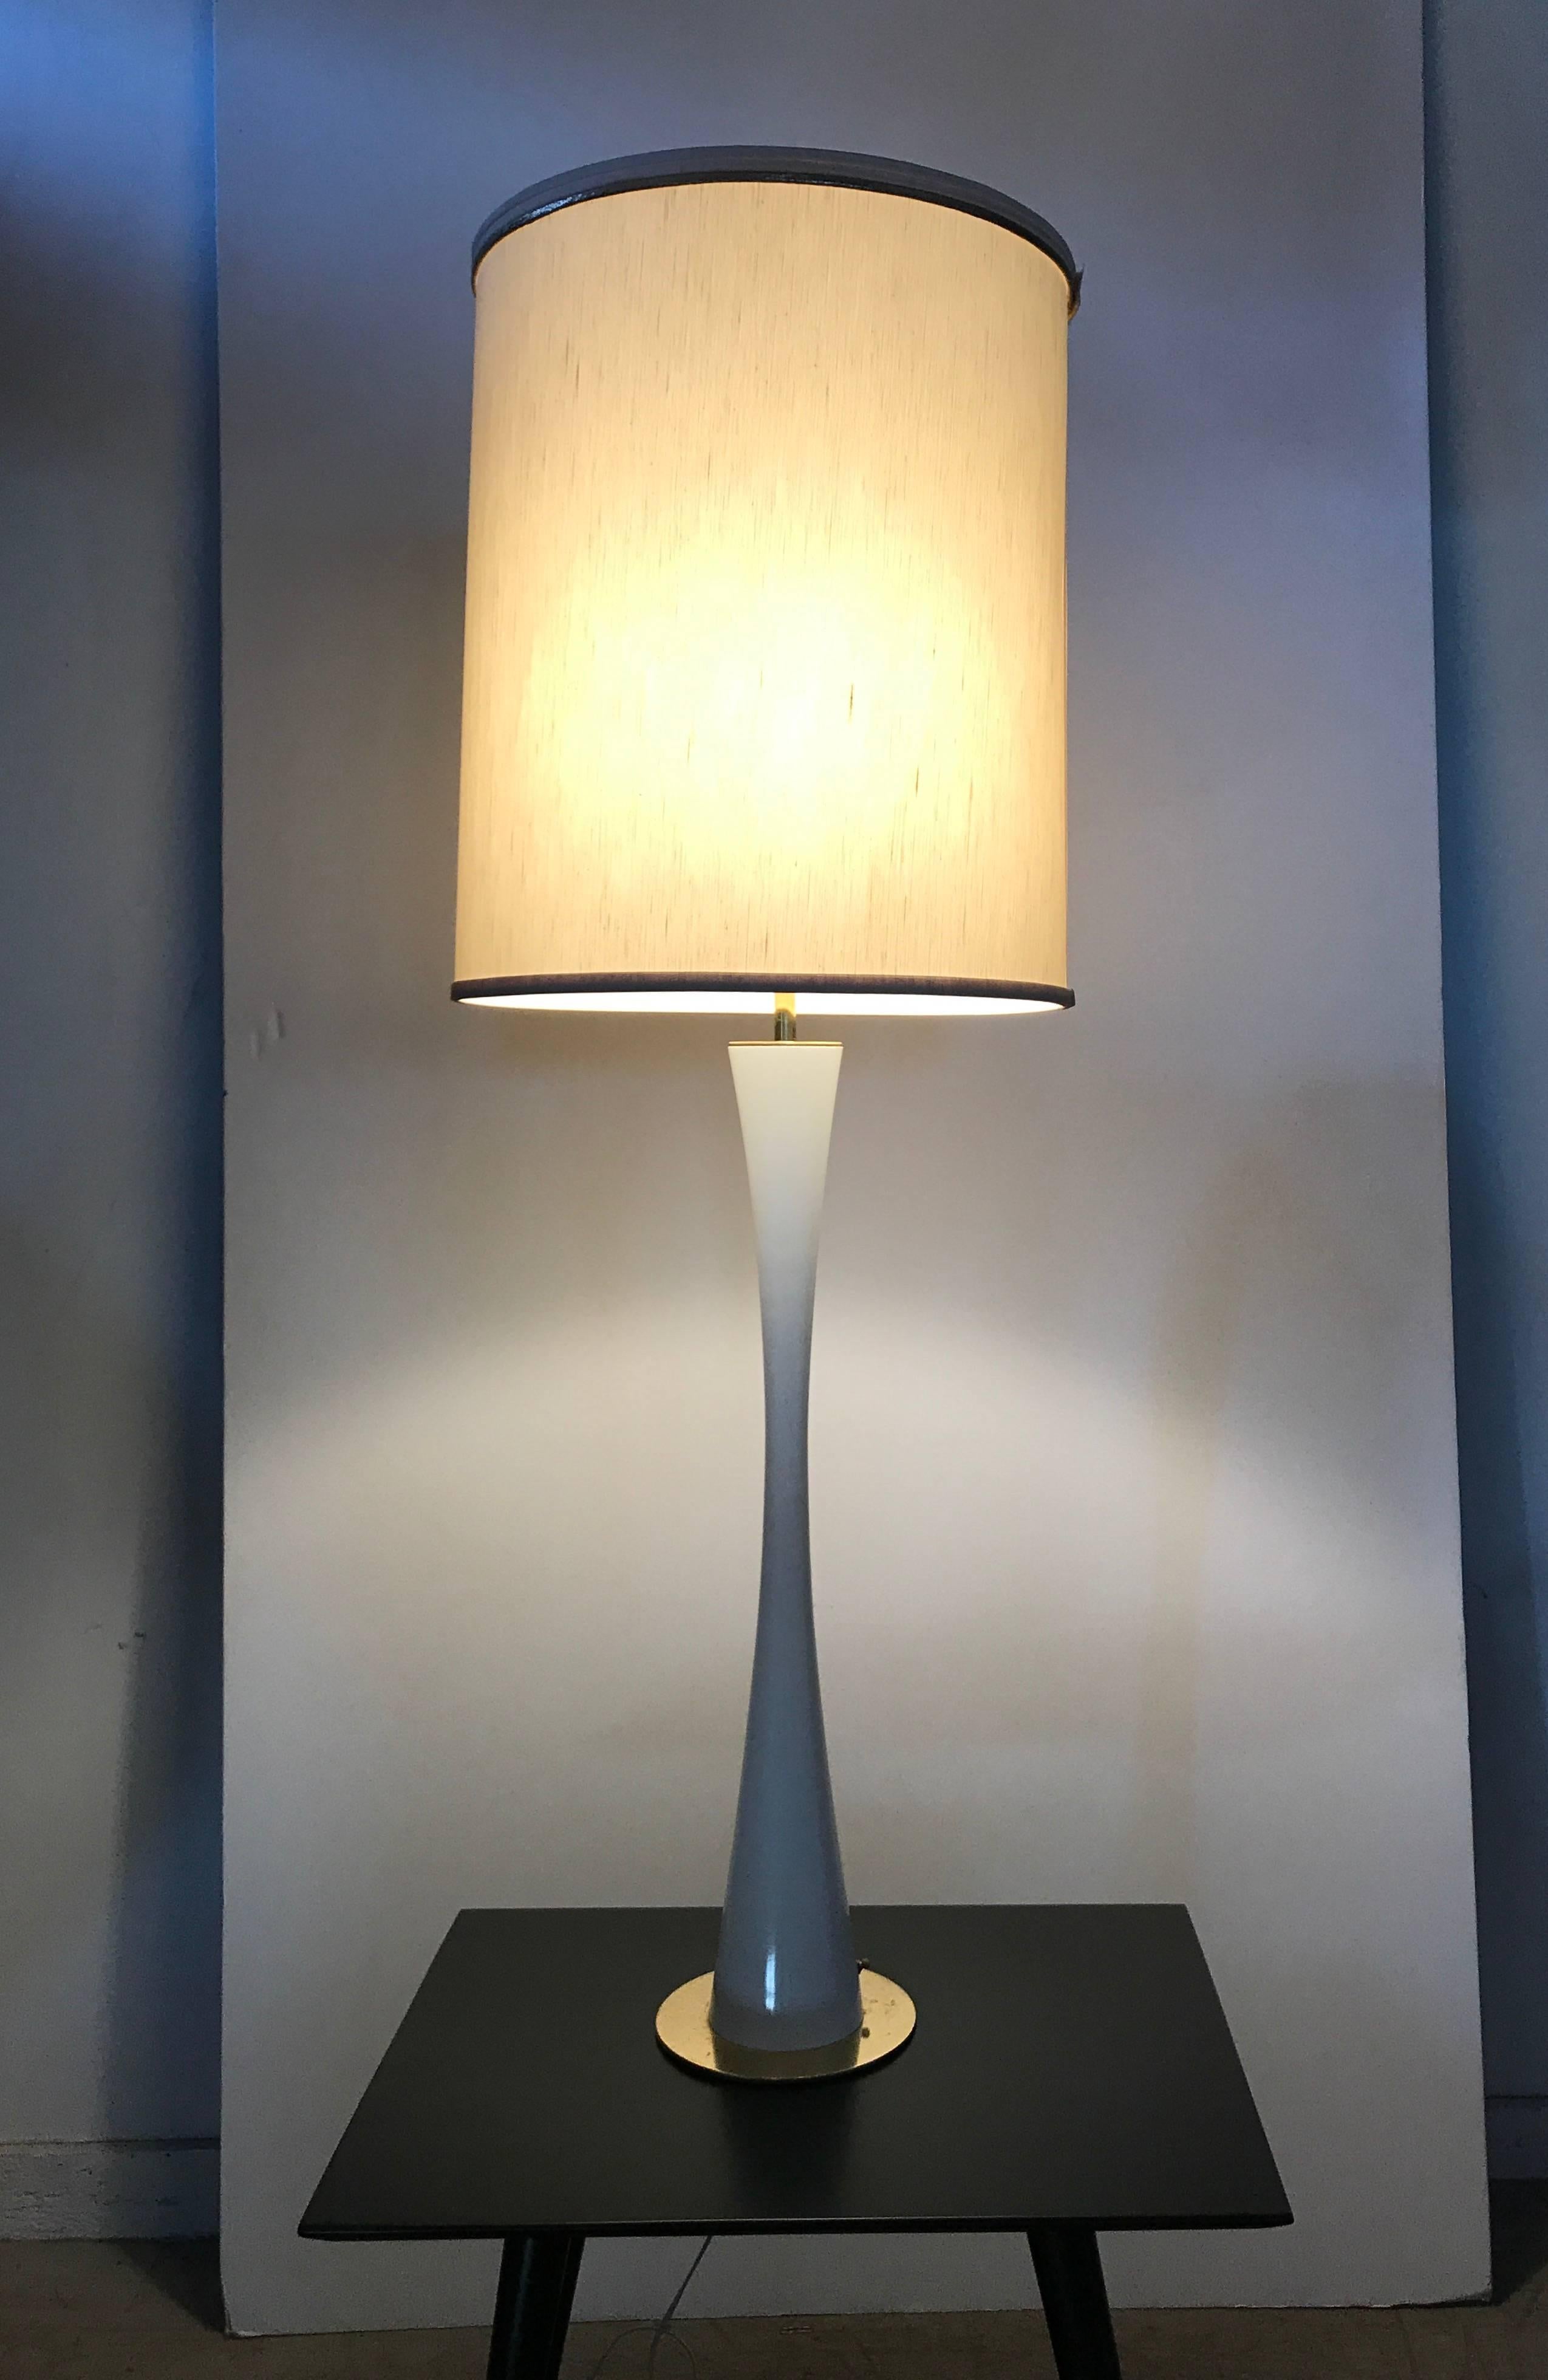 Elegant, sexy extra tall white enamel and brass Hourglass lamp by Stewart Ross James for Hansen, amazing quality and design, Can be used as table or floor lamp measuring 50 inches high, retains original lamp shade. Three-way light function.